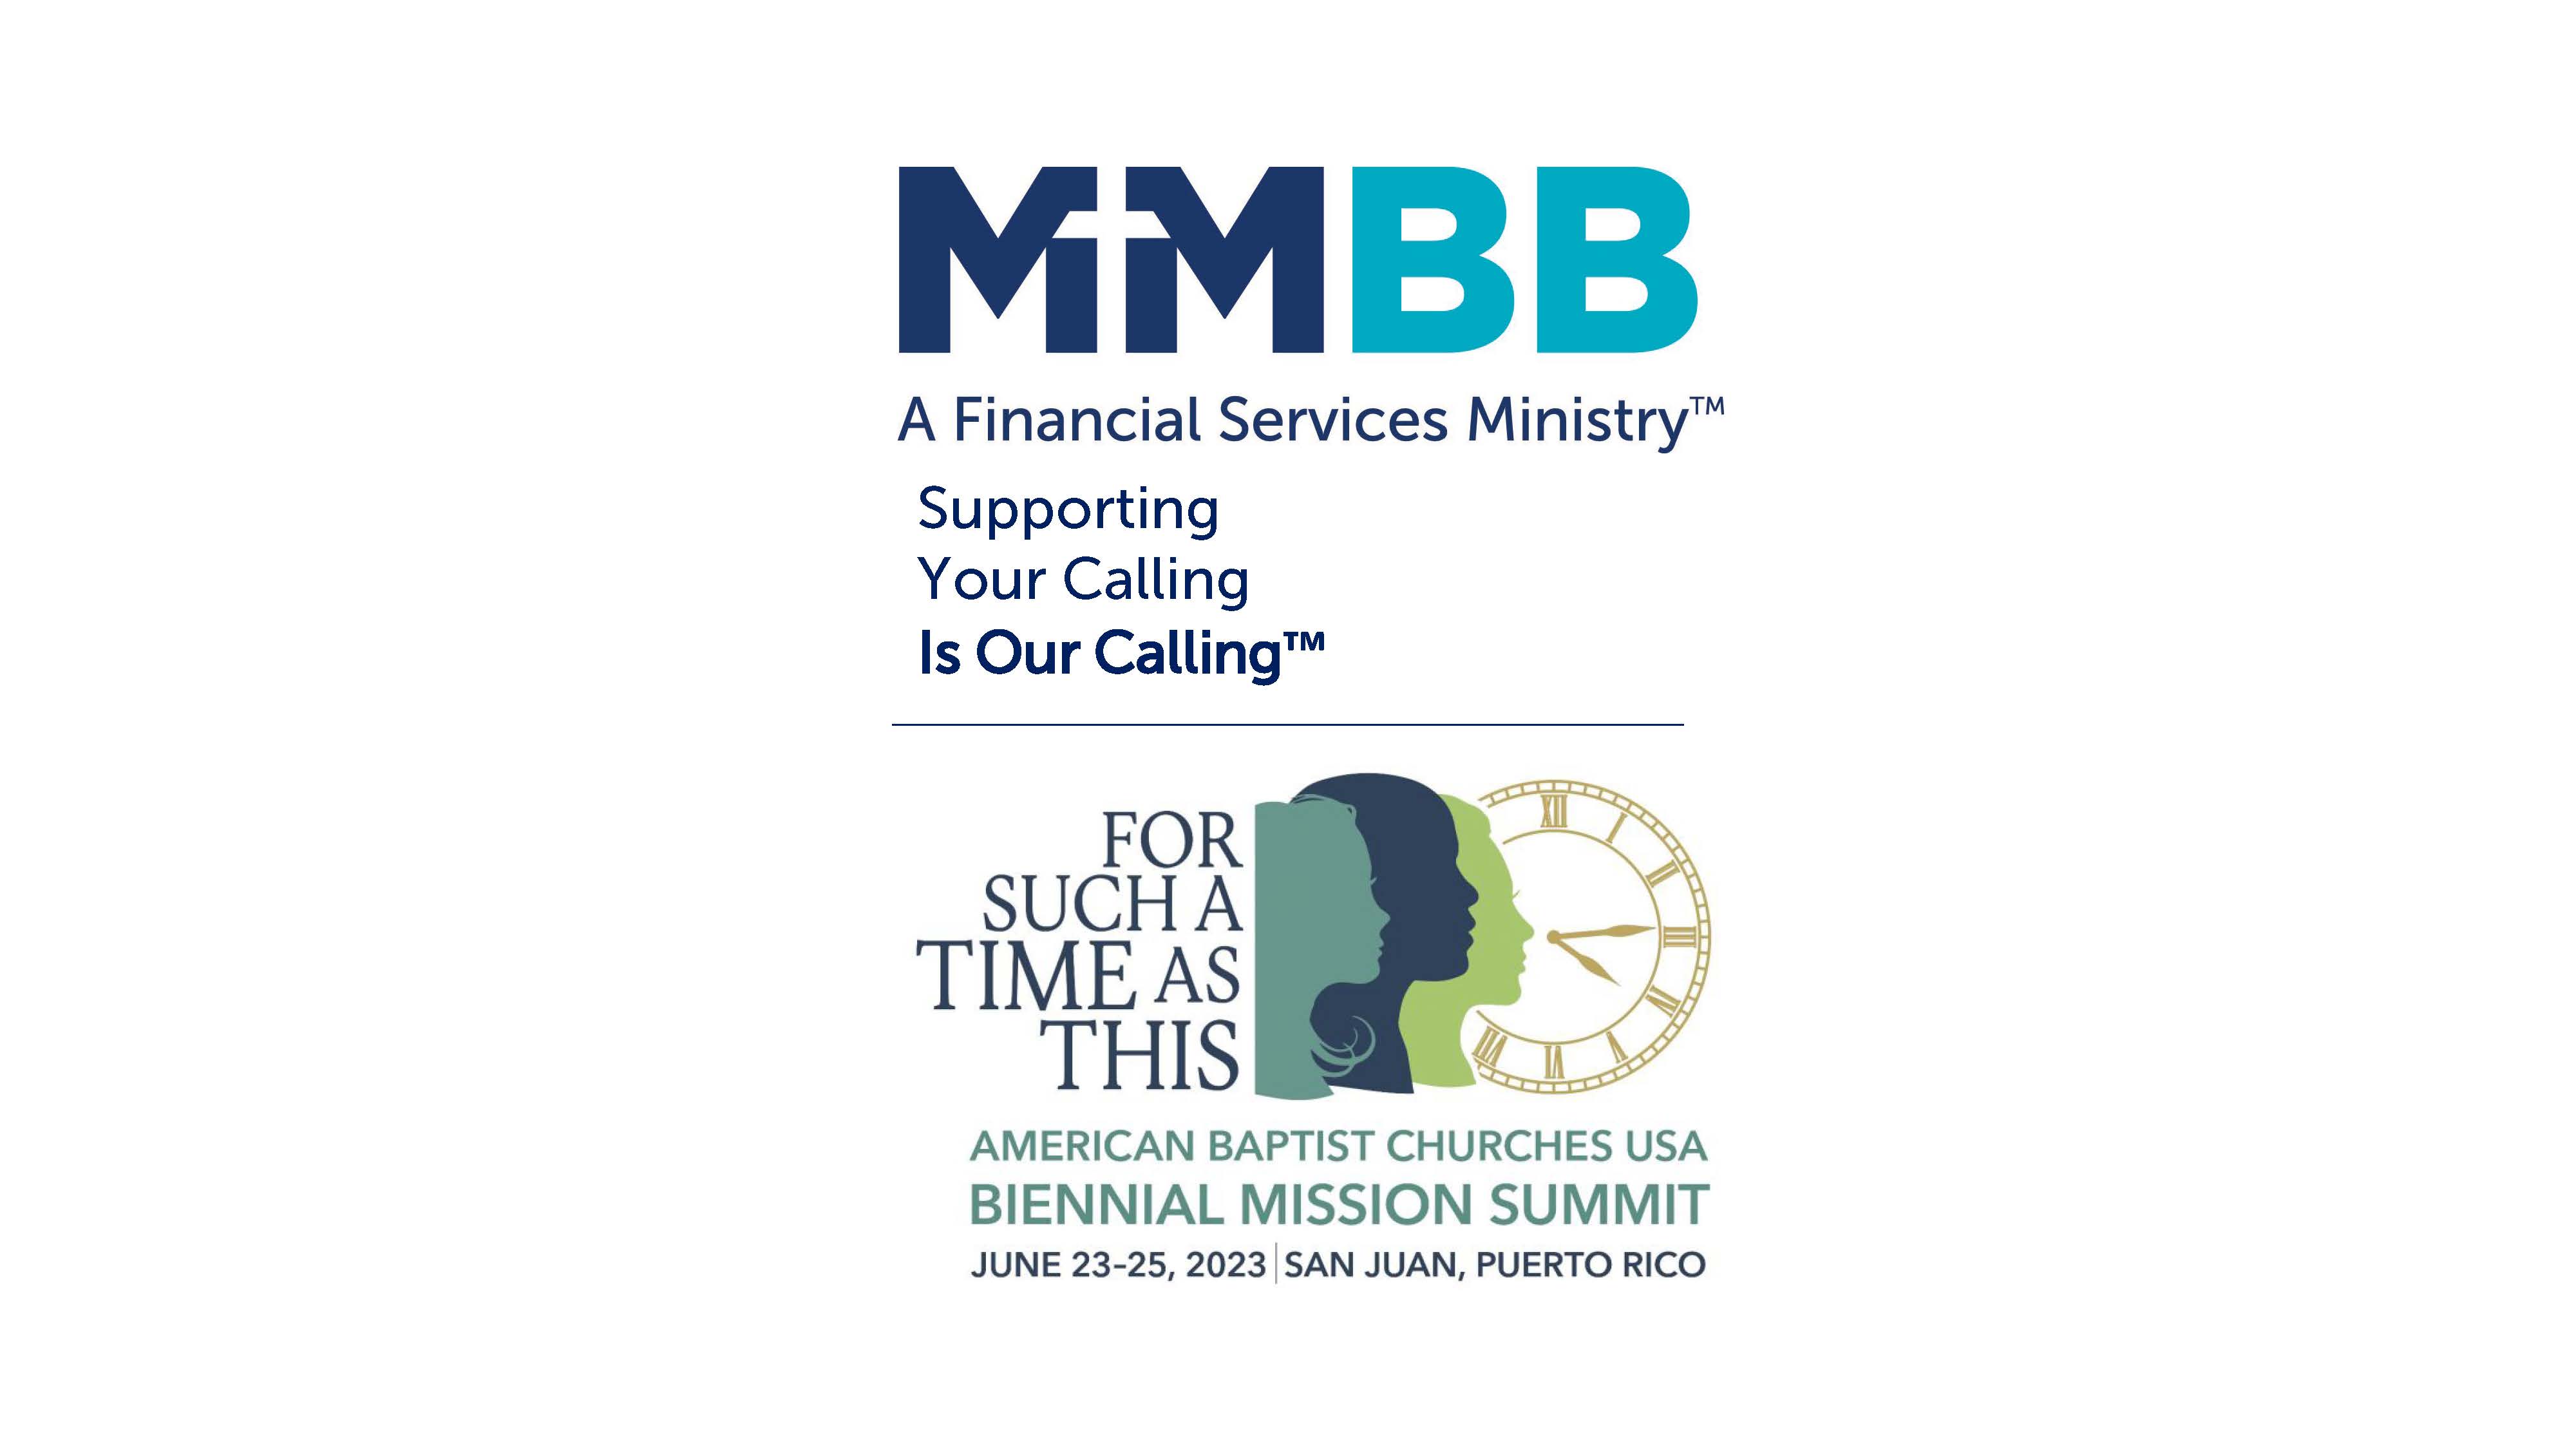 MMBB Offers Exciting Lineup at the ABCUSA Biennial Mission Summit 